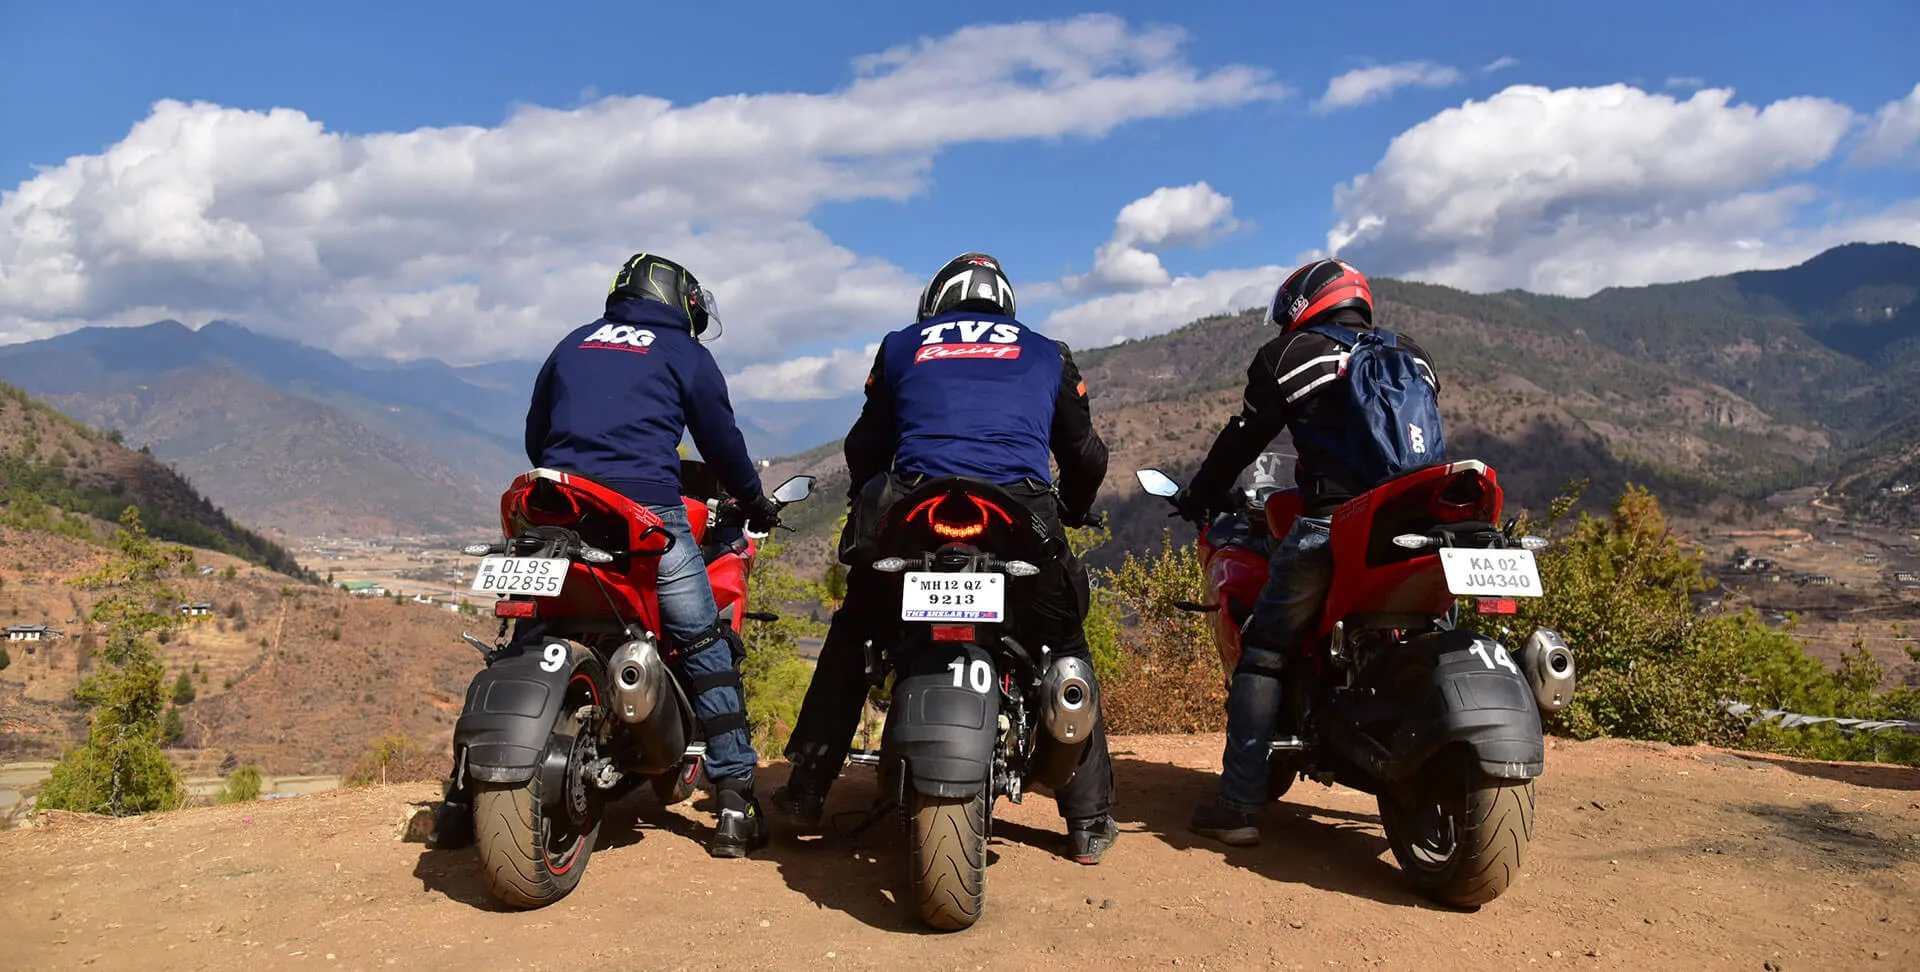 TVS Apache Owners Group (AOG)- Riders Unite To Ride Together